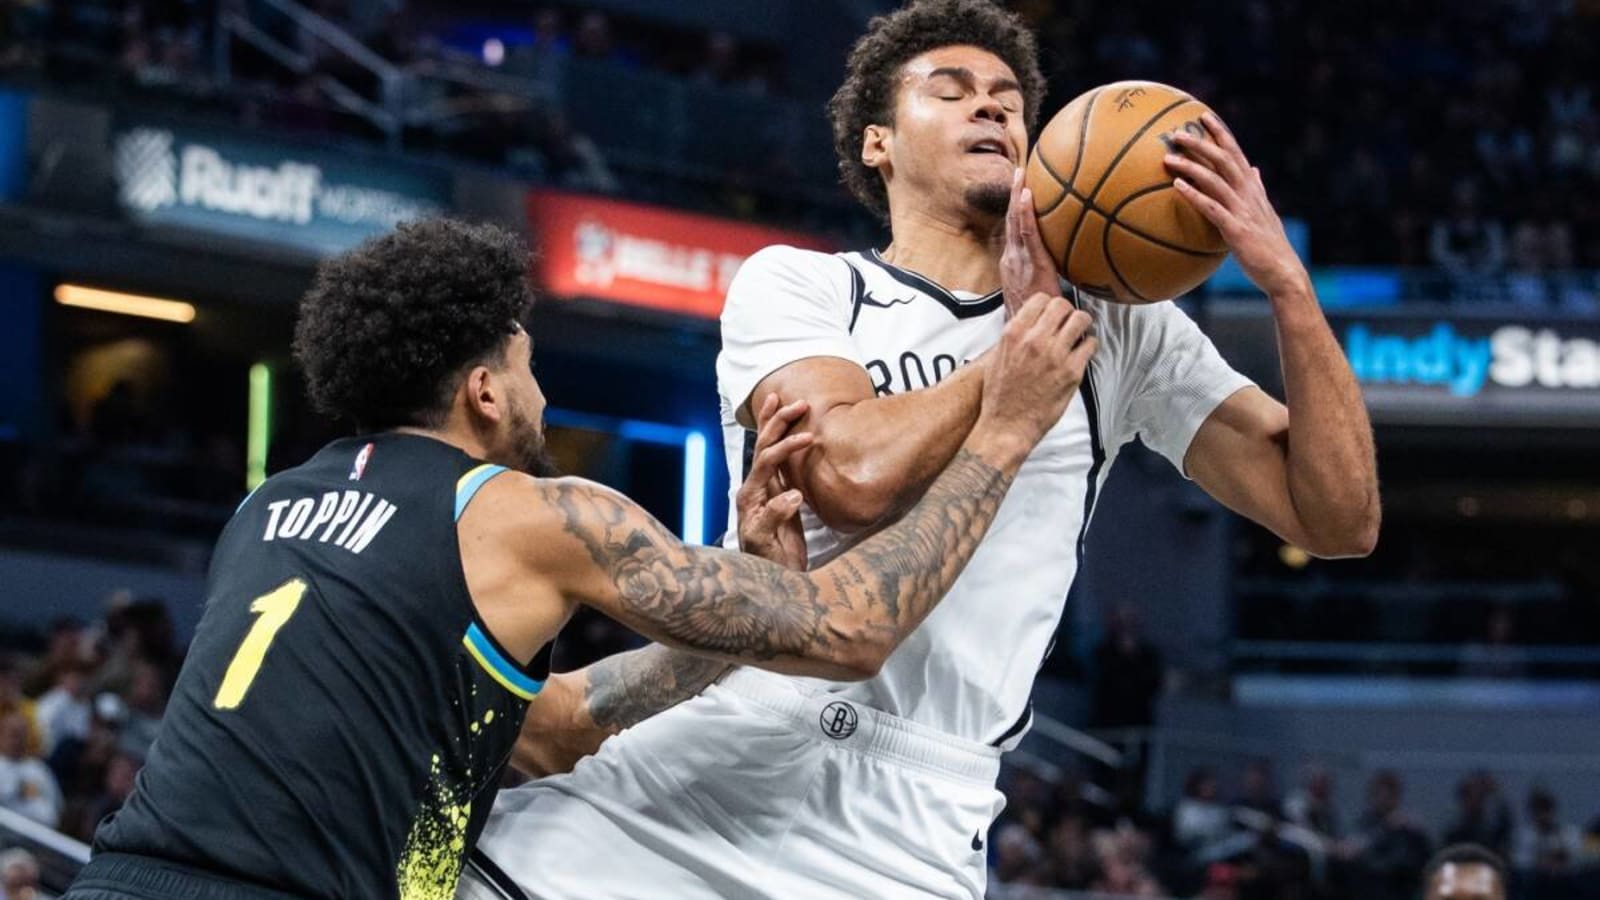 Cam Johnson undisturbed by a sudden bench move from the Nets: “Control what you can control”